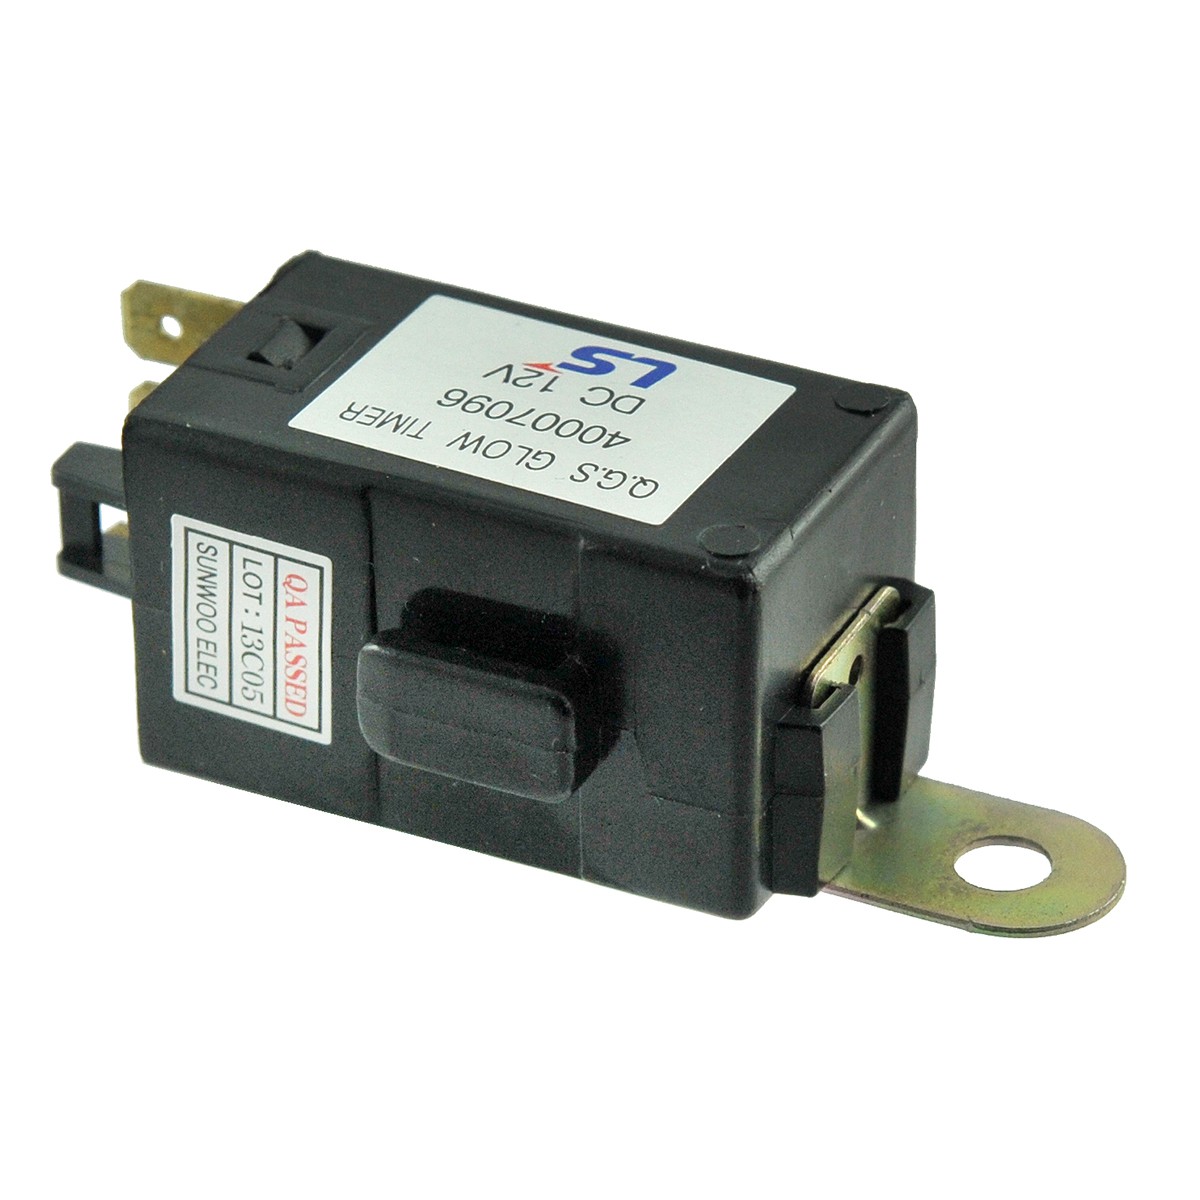 Candle heating relay / 12V/10s / LS R 41 / LS i 28 / TRG750 / Q1800017 / 40161520 / 40007096